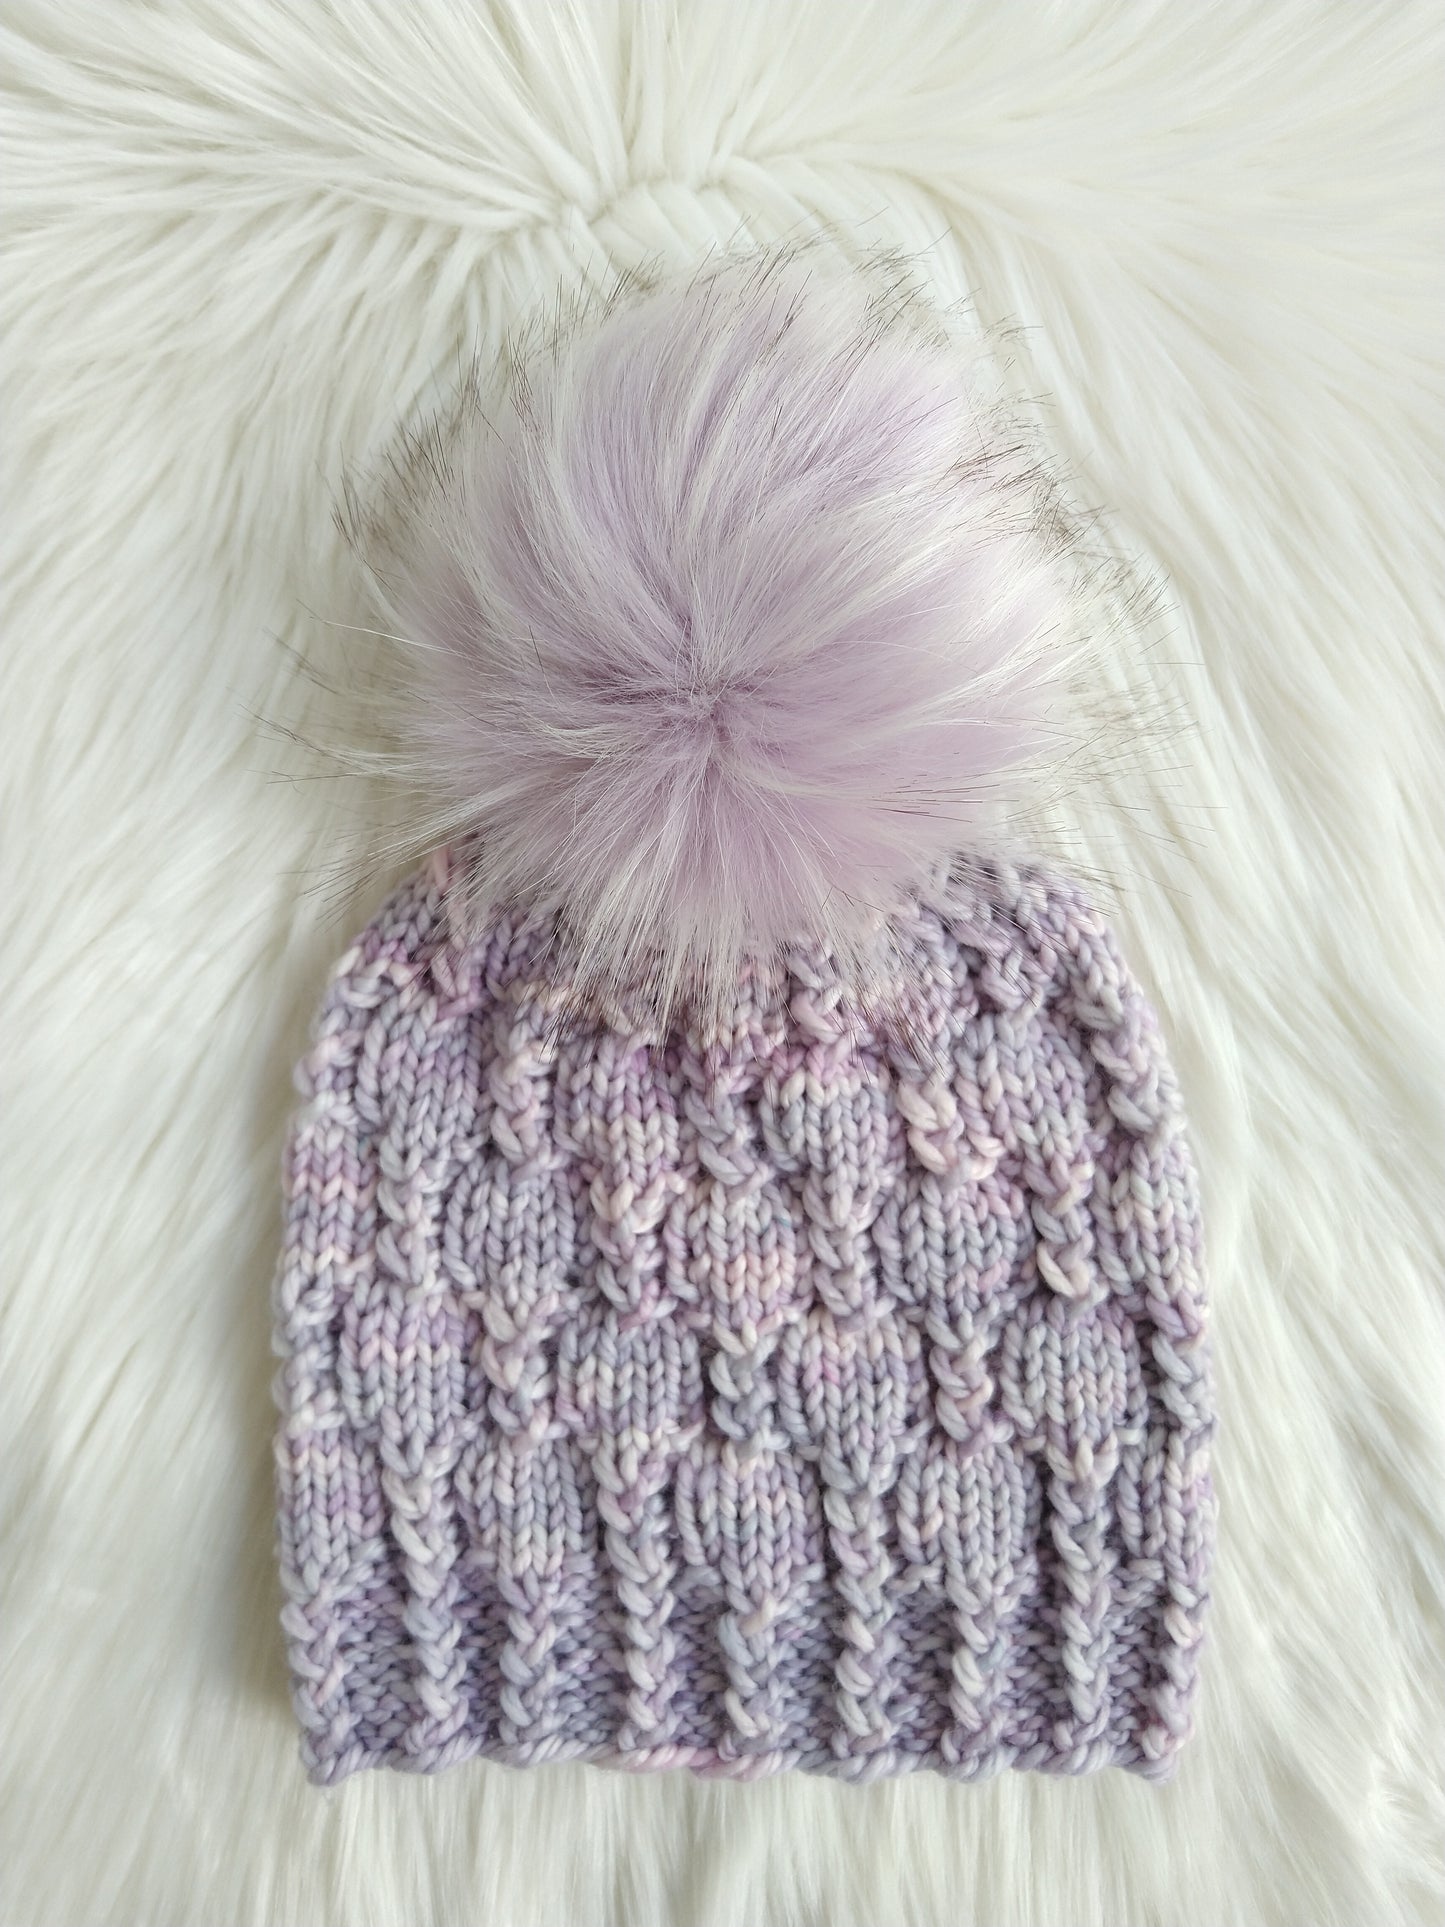 Dirigible Plum Hat Knitting Pattern – Wanded Knit and Crochet